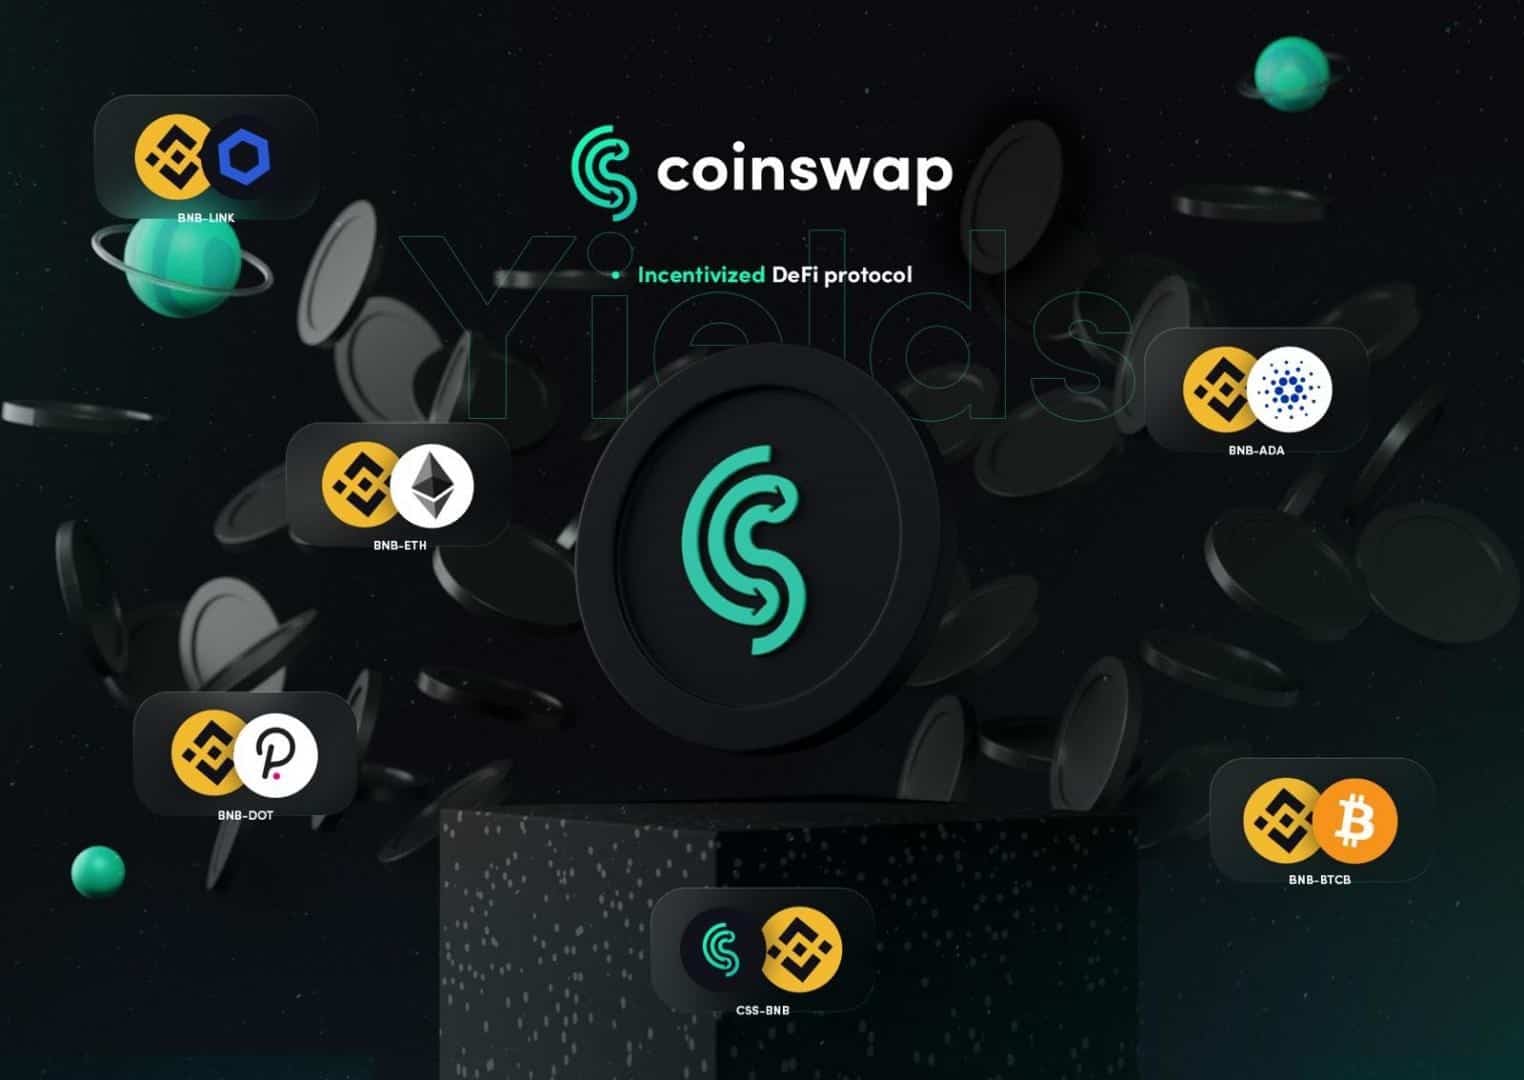 Coinswap-space-adds-staking-pools-with-ada-rewards